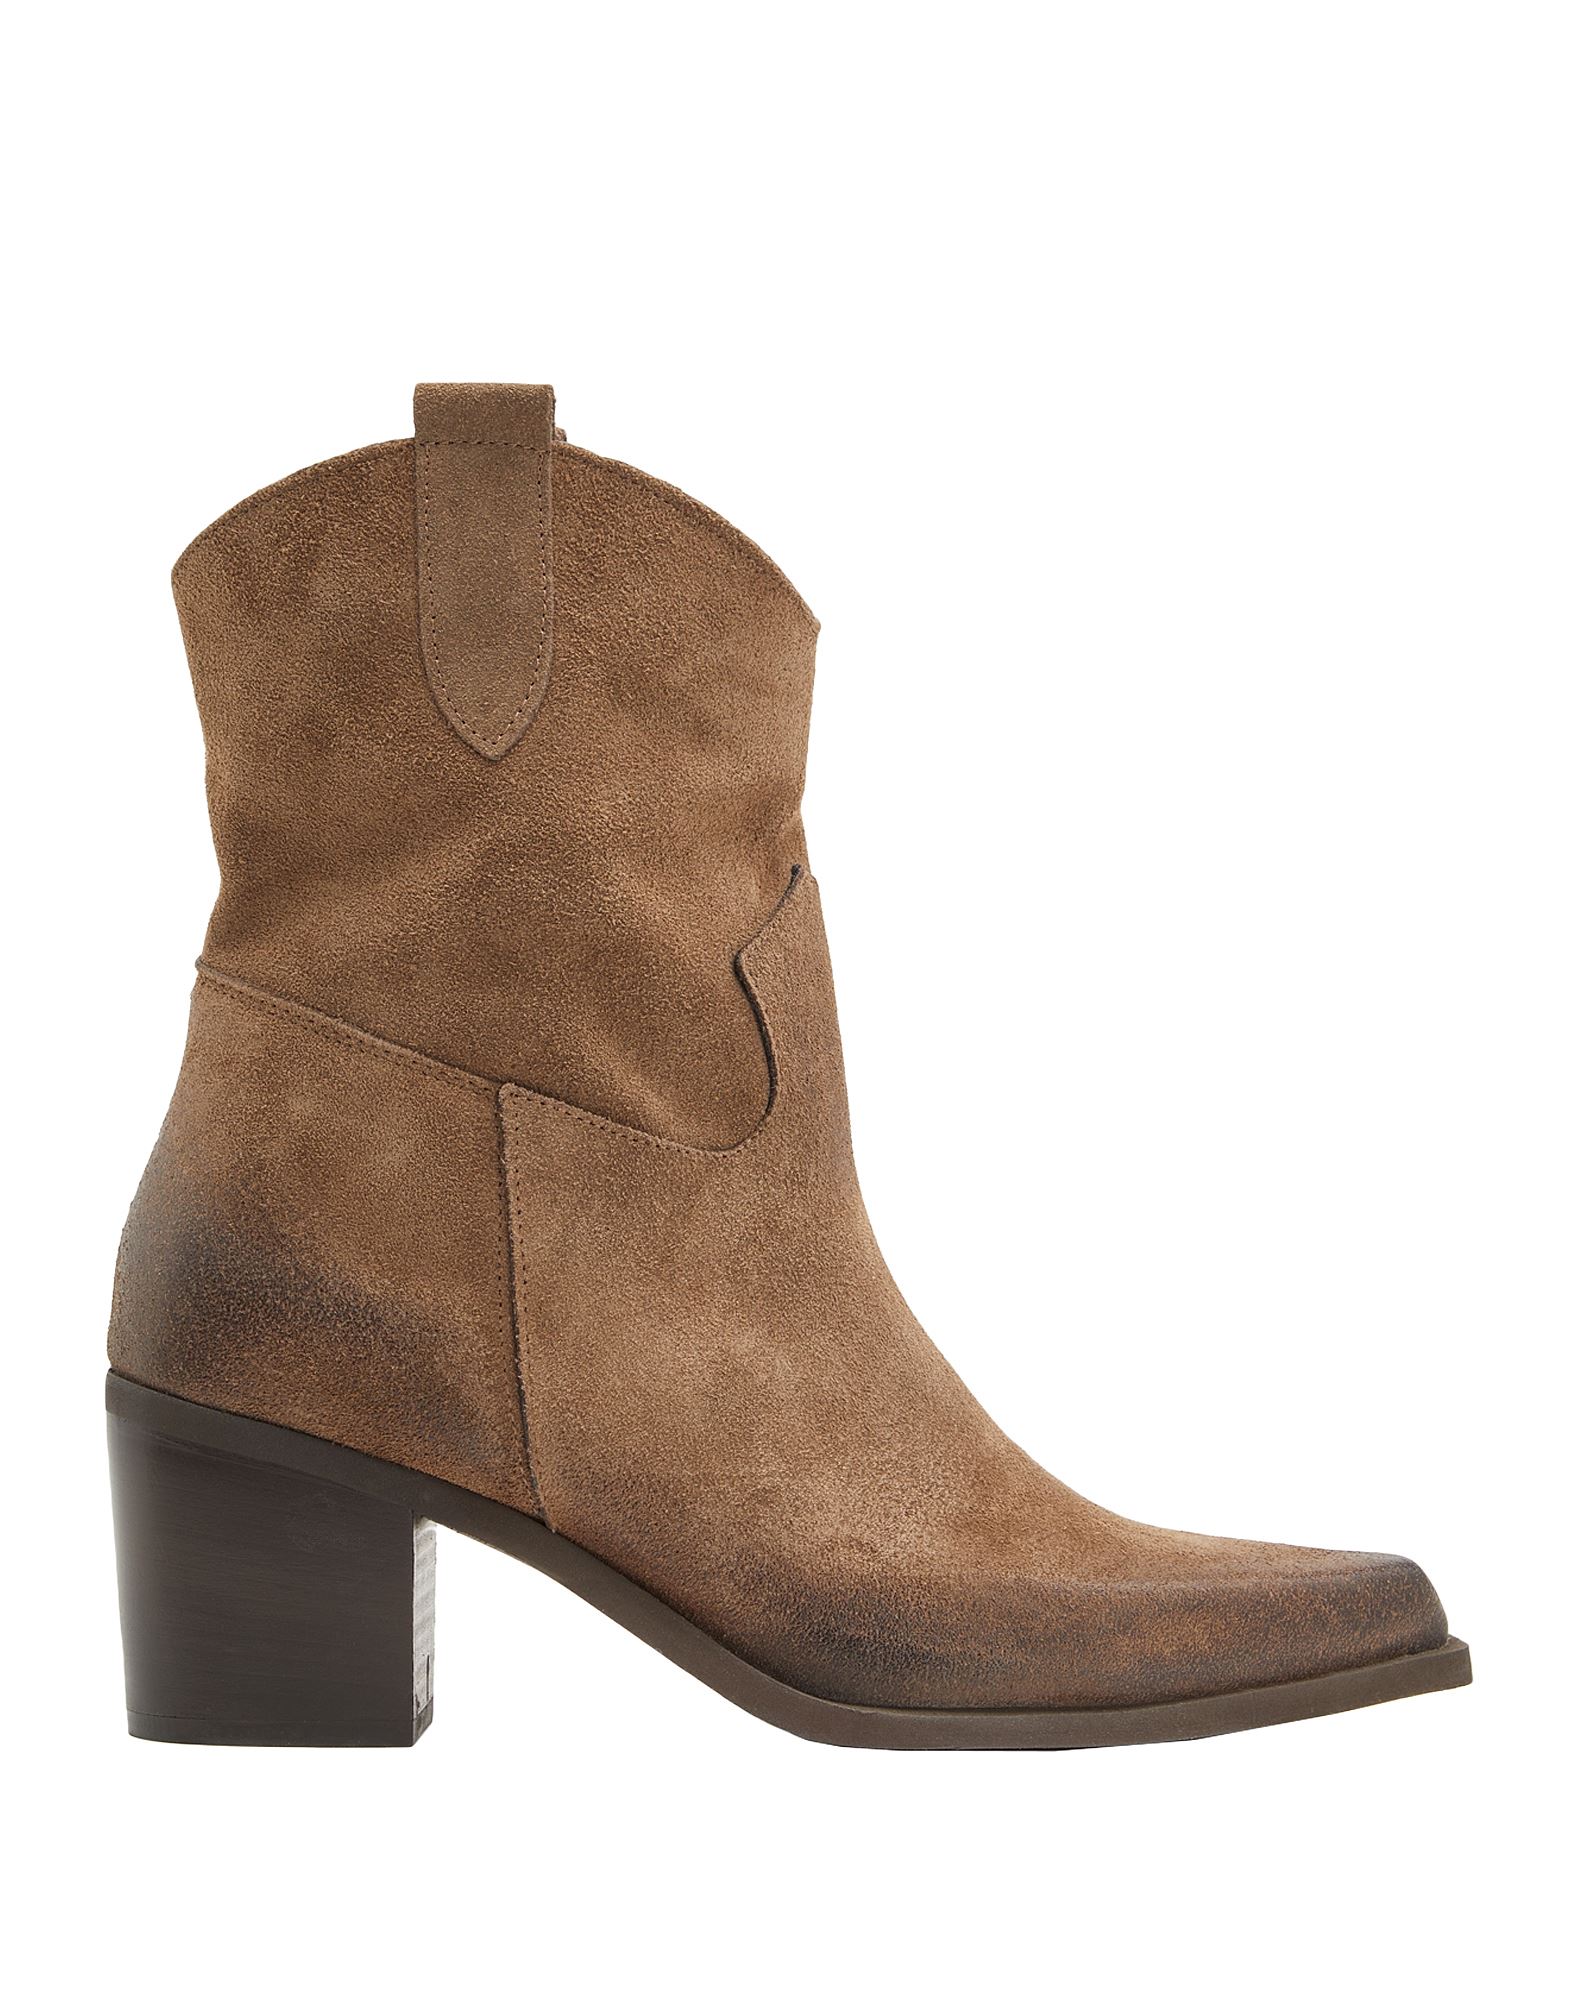 8 By Yoox Ankle Boots In Beige